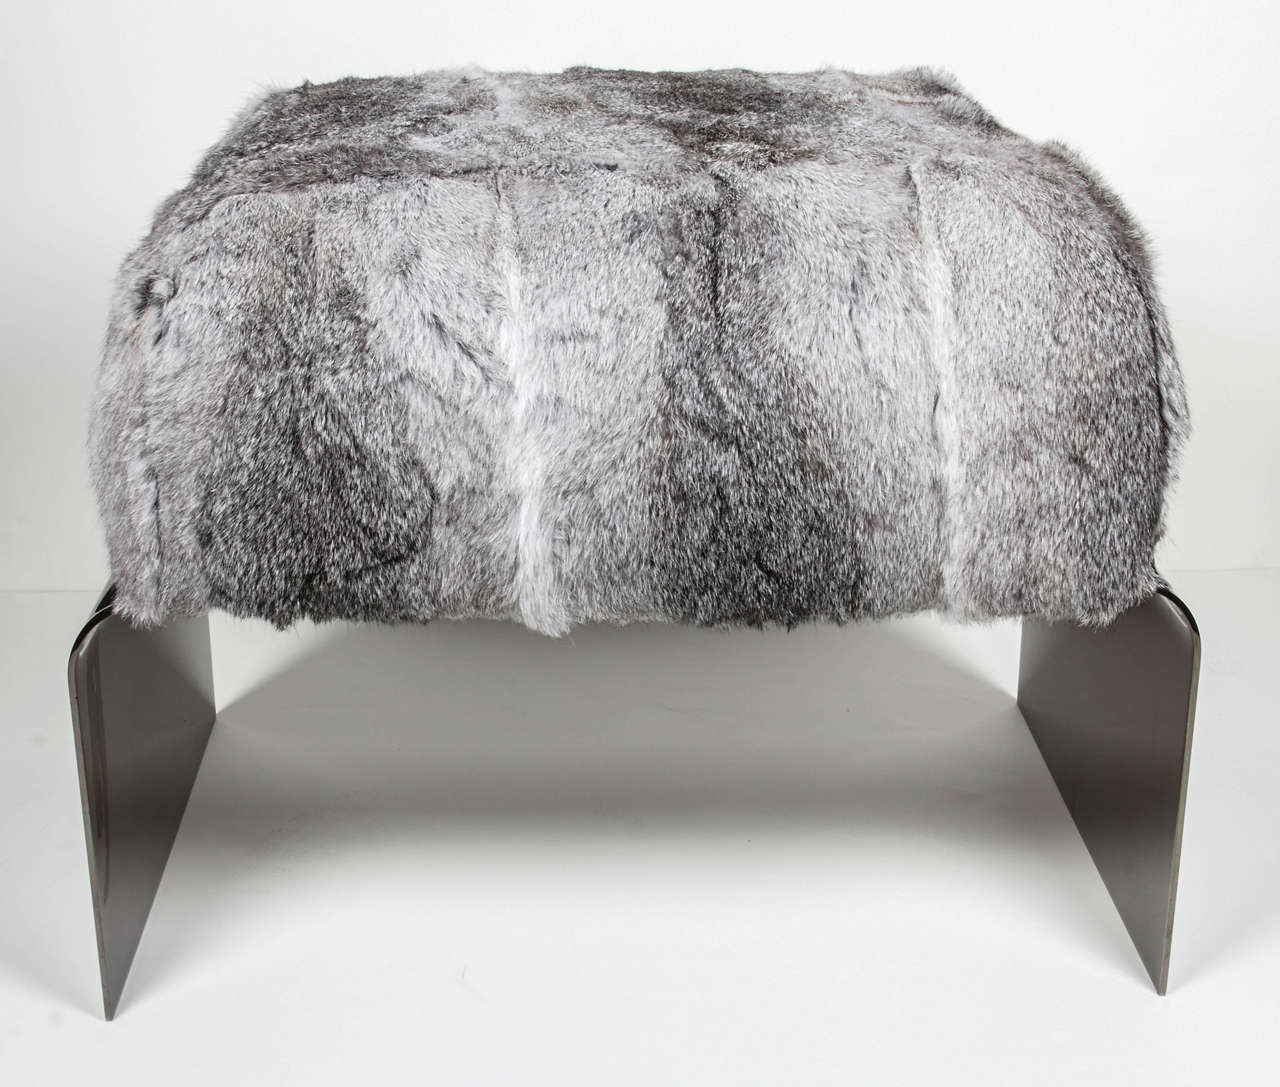 Stunning mid-century modern style stool with streamlined waterfall base design in polished black nickel. The bench is upholstered in luxurious rabbit fur in variant hues of grey. Great accent piece for any room and also great as an ottoman.